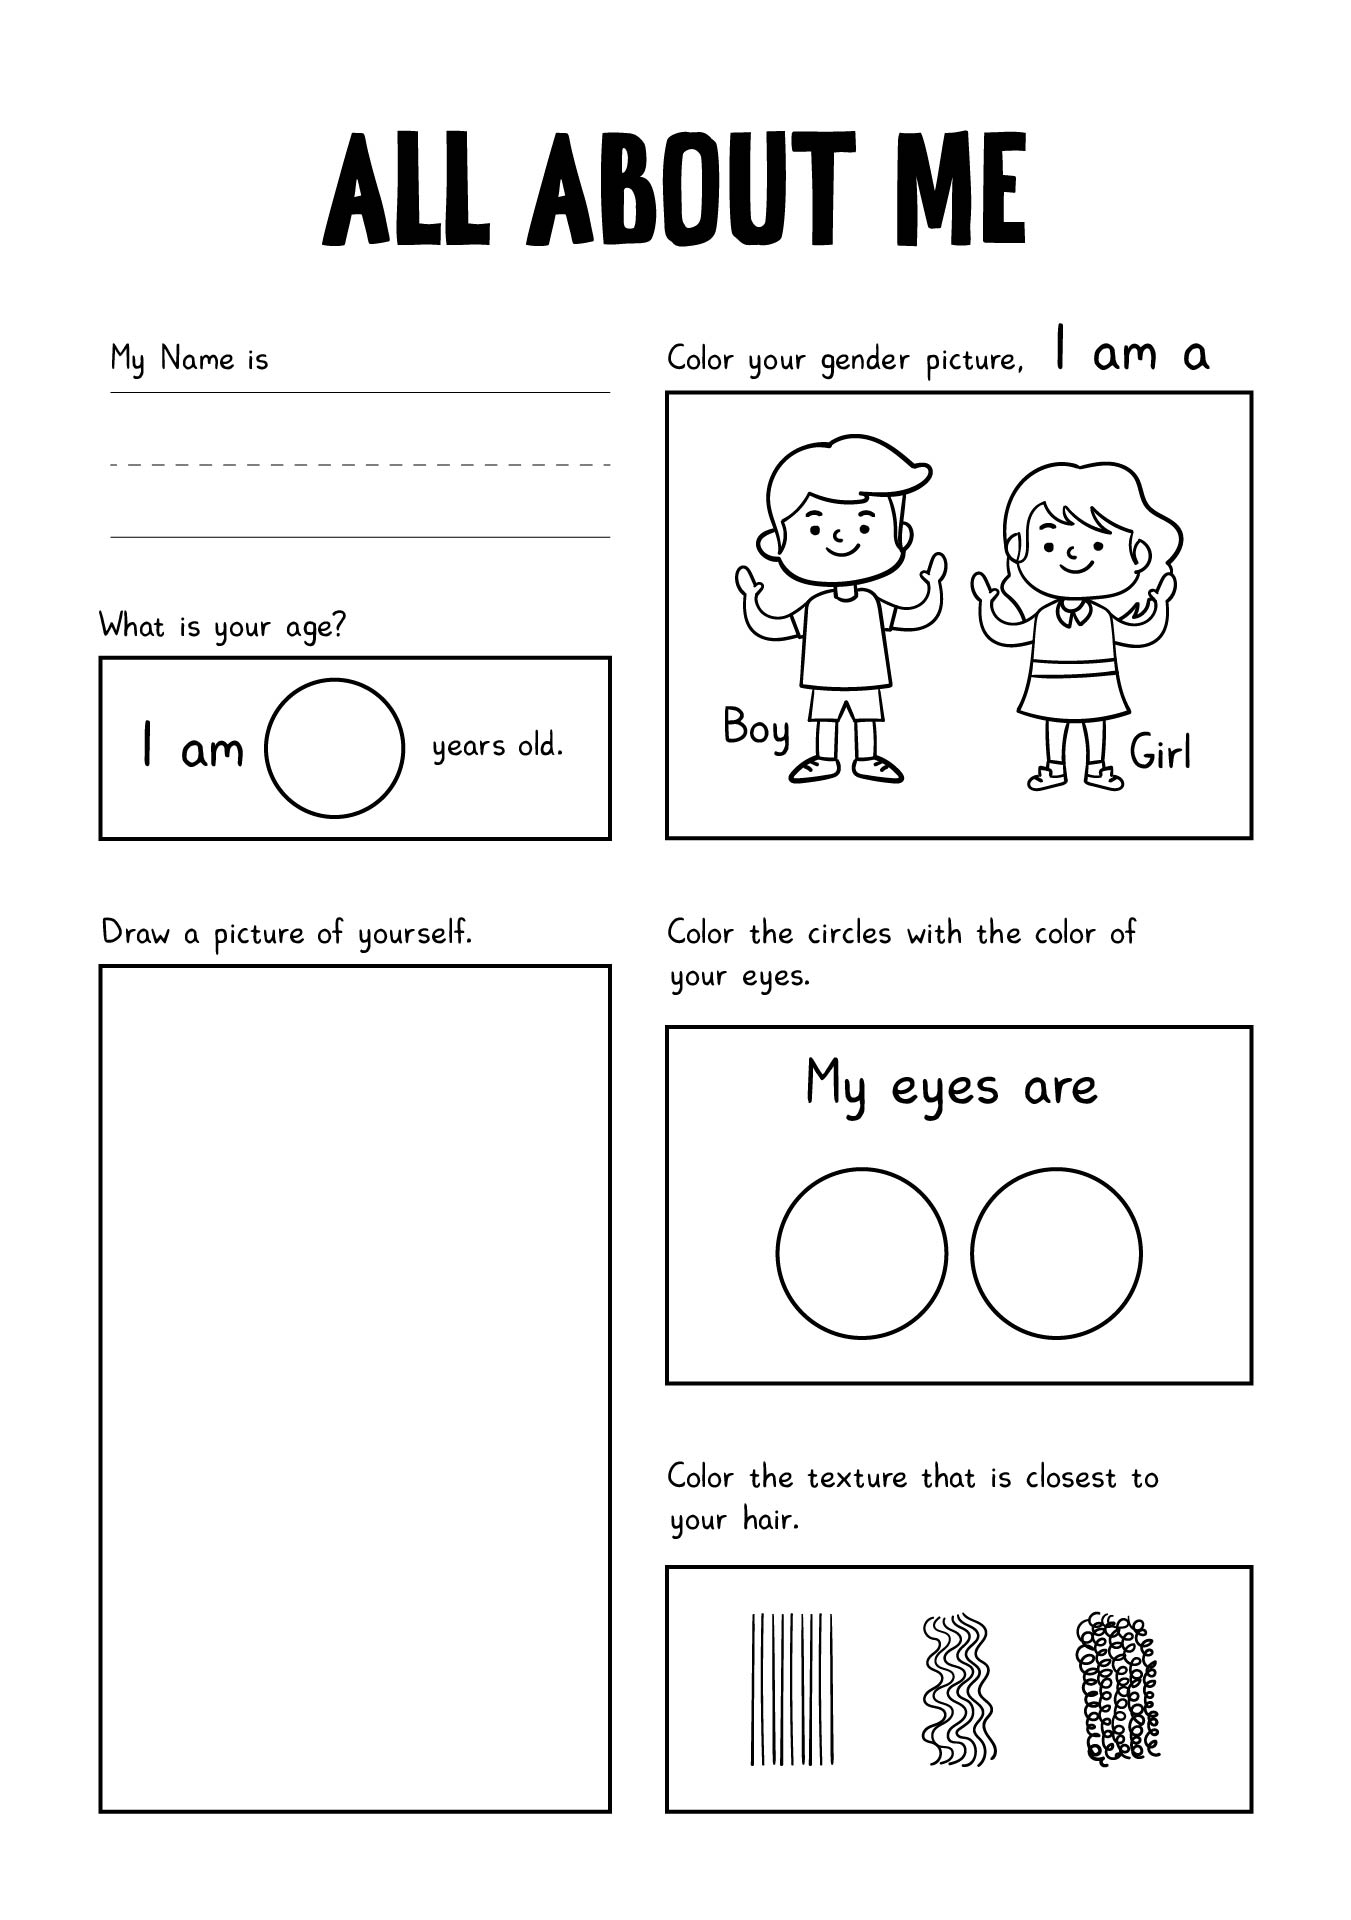 All About Me Student Profile Sheet